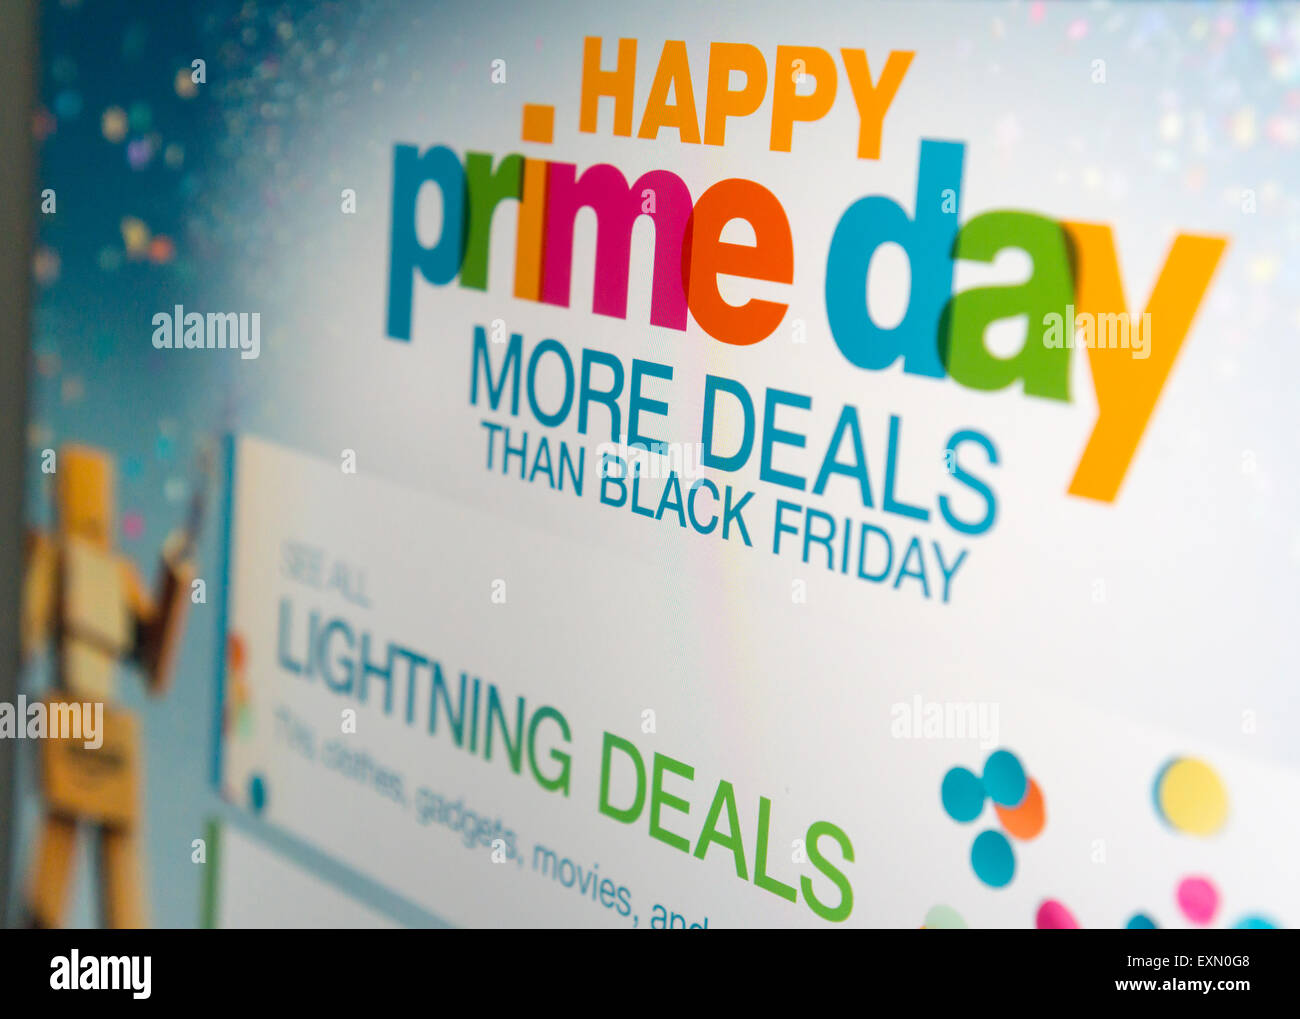 The Amazon website promotes their self-proclaimed 'Prime Day' on Wednesday, July 15, 2015. Bargains and deals galore are offered to Amazon Prime shoppers on this one-day event. The so-called holiday celebrates Amazon's 20th year in business and attempts to draw in customers as June retail sales in the U.S. were weak. Walmart has competing sales on their website today.  (© Richard B. Levine) Stock Photo